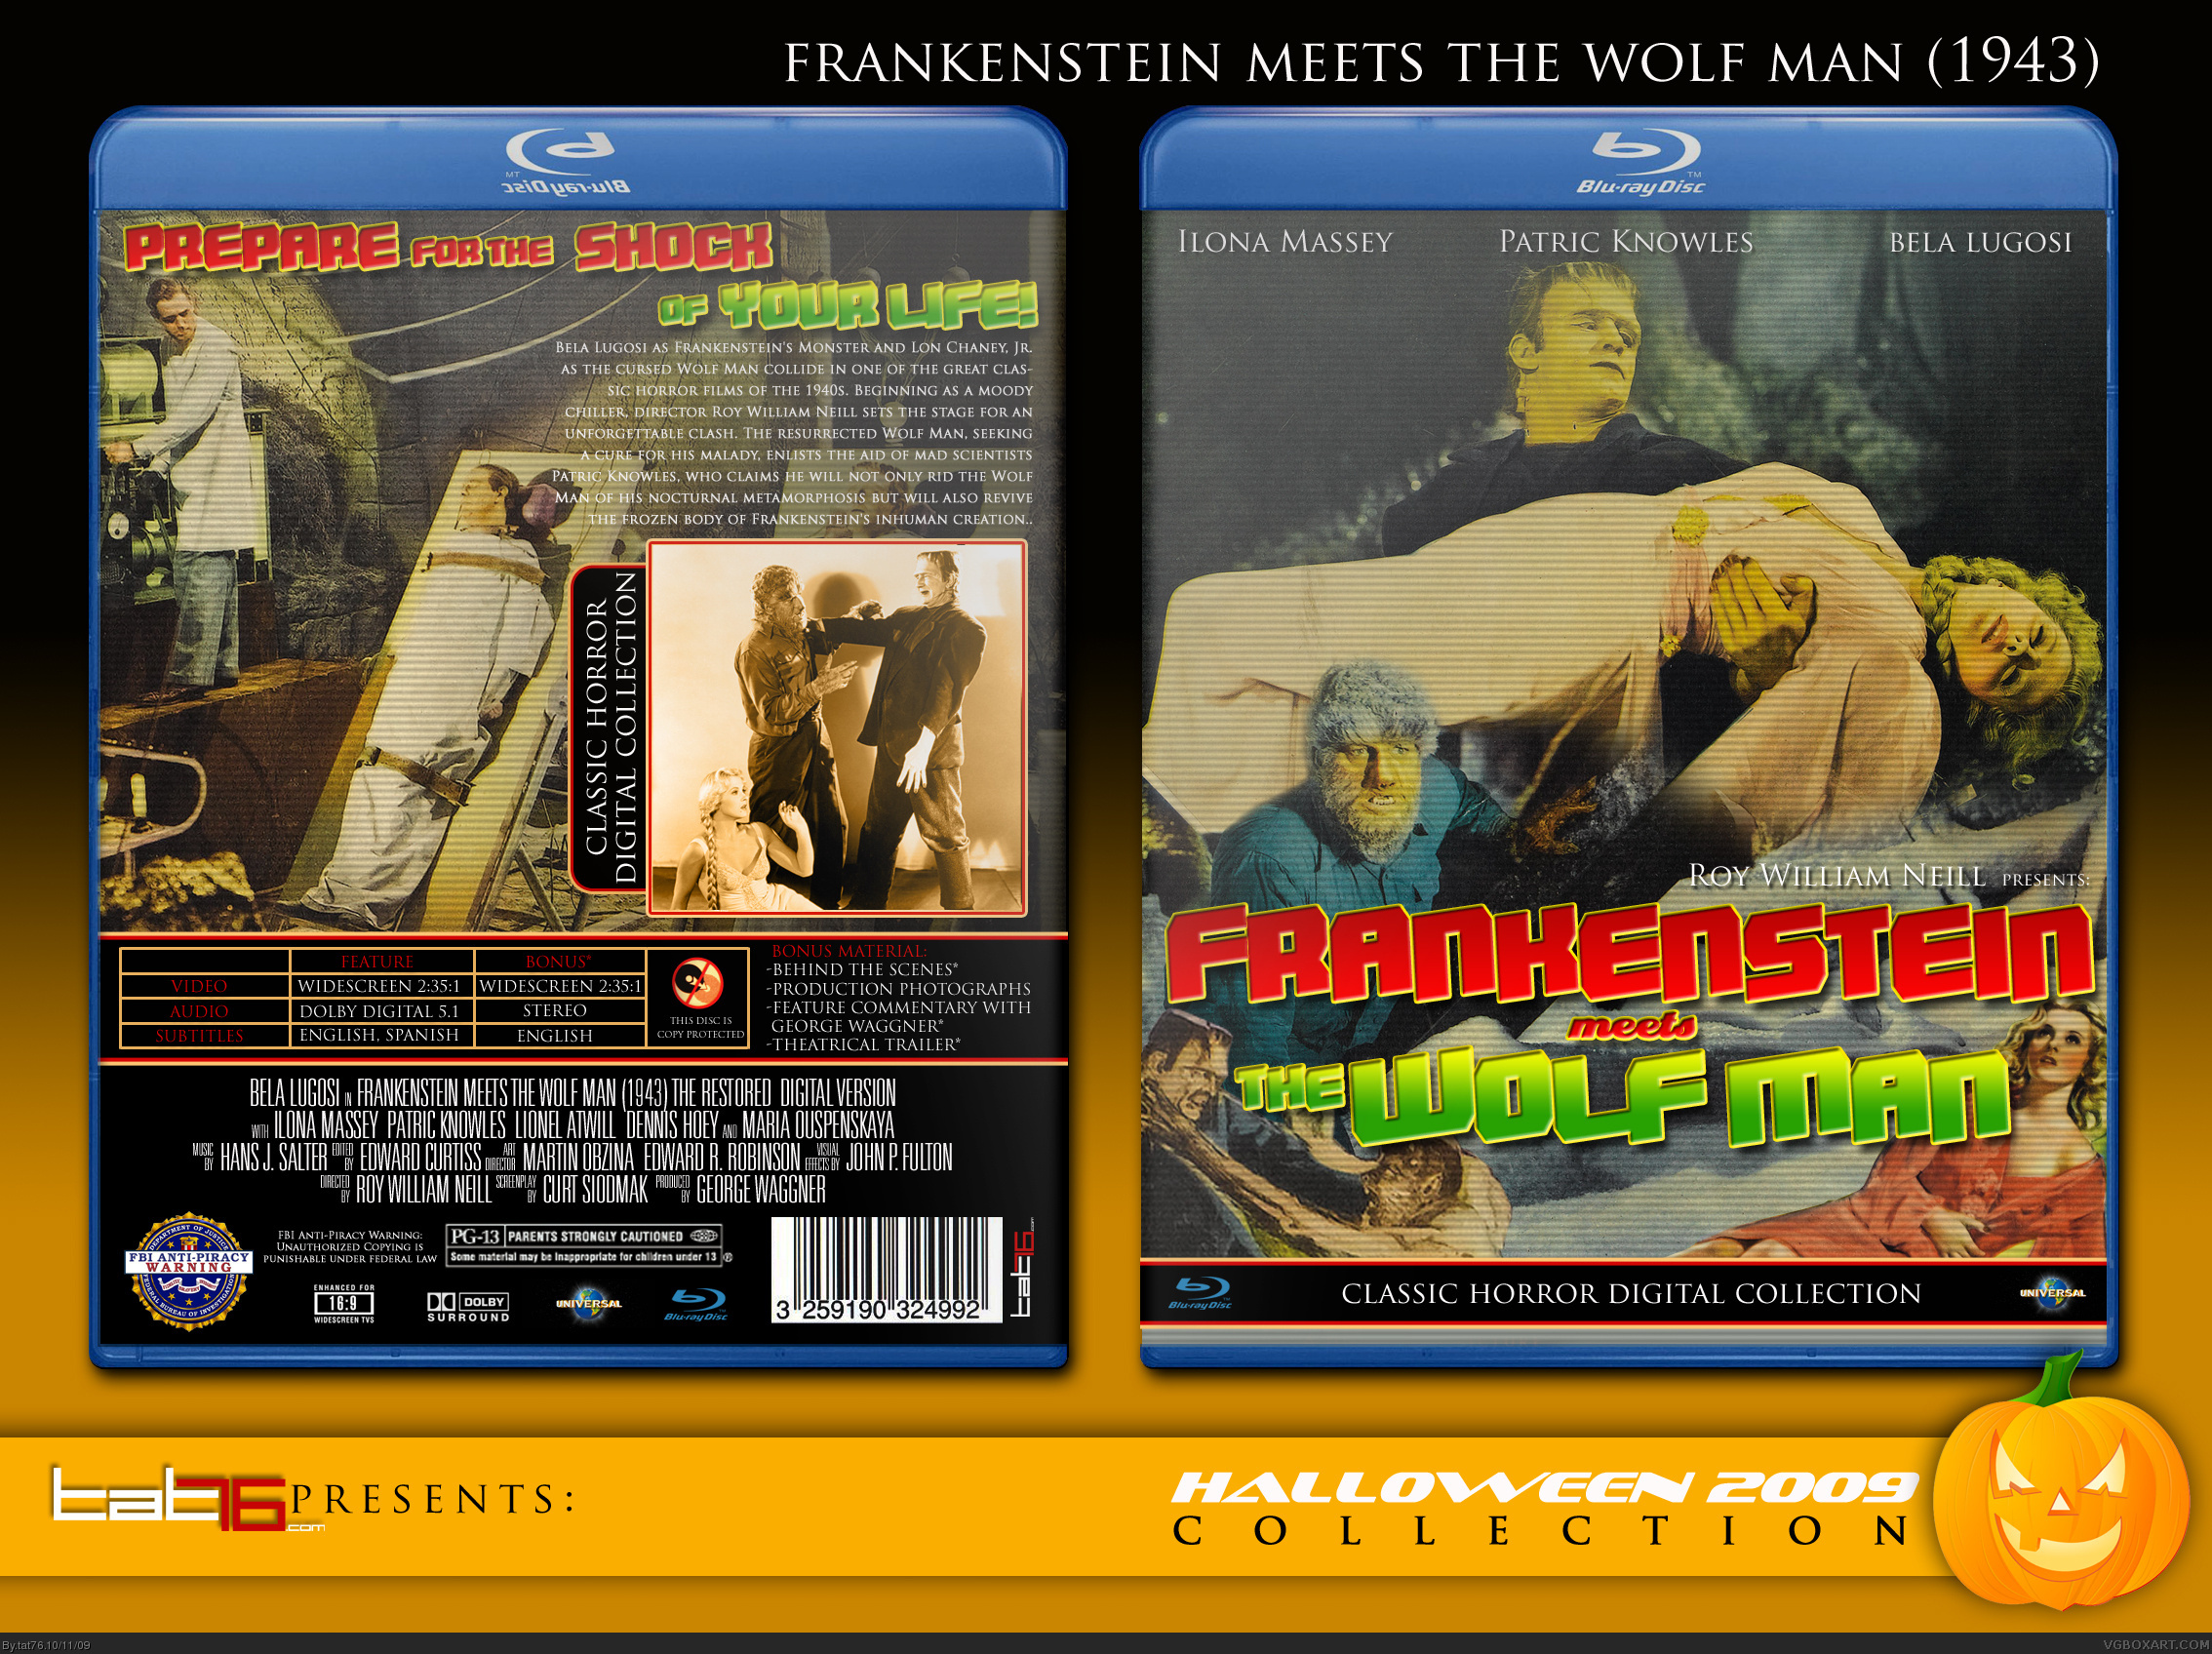 Frankenstein meets the Wolf Man box cover